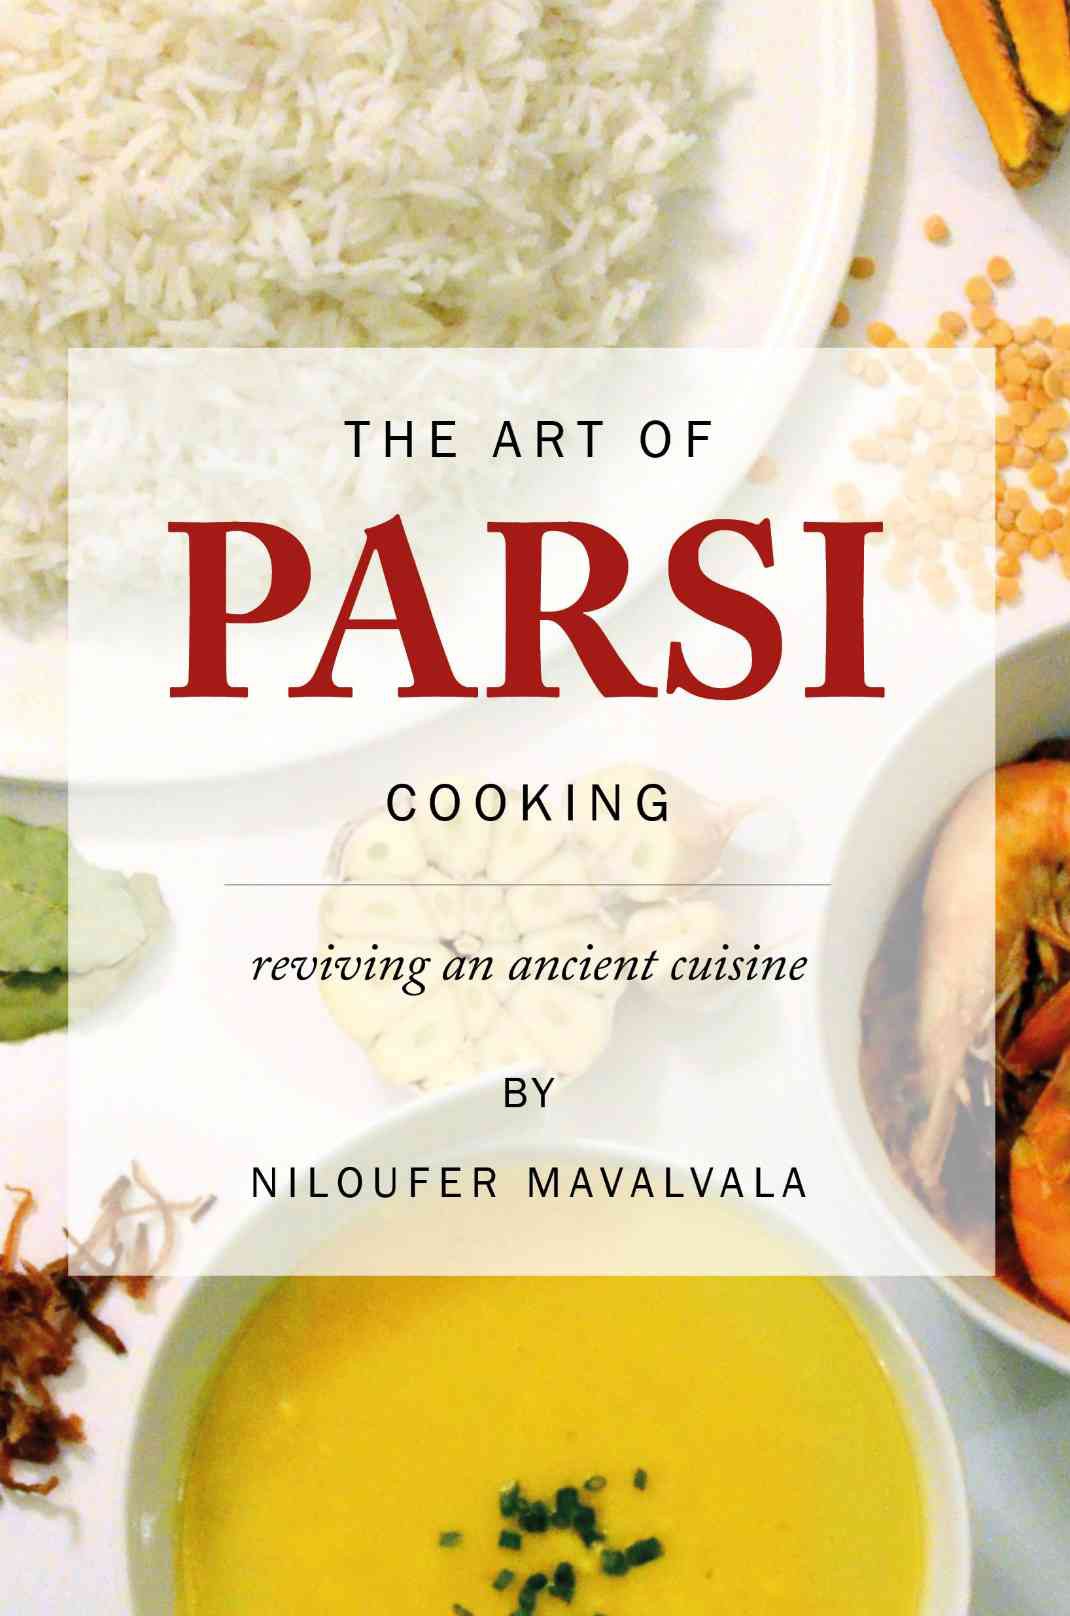 Interfaith Conference at Toronto attended by Niloufer Mavalavala, author of “The Art of Parsi Cooking: Reviving an Ancient Cuisine”